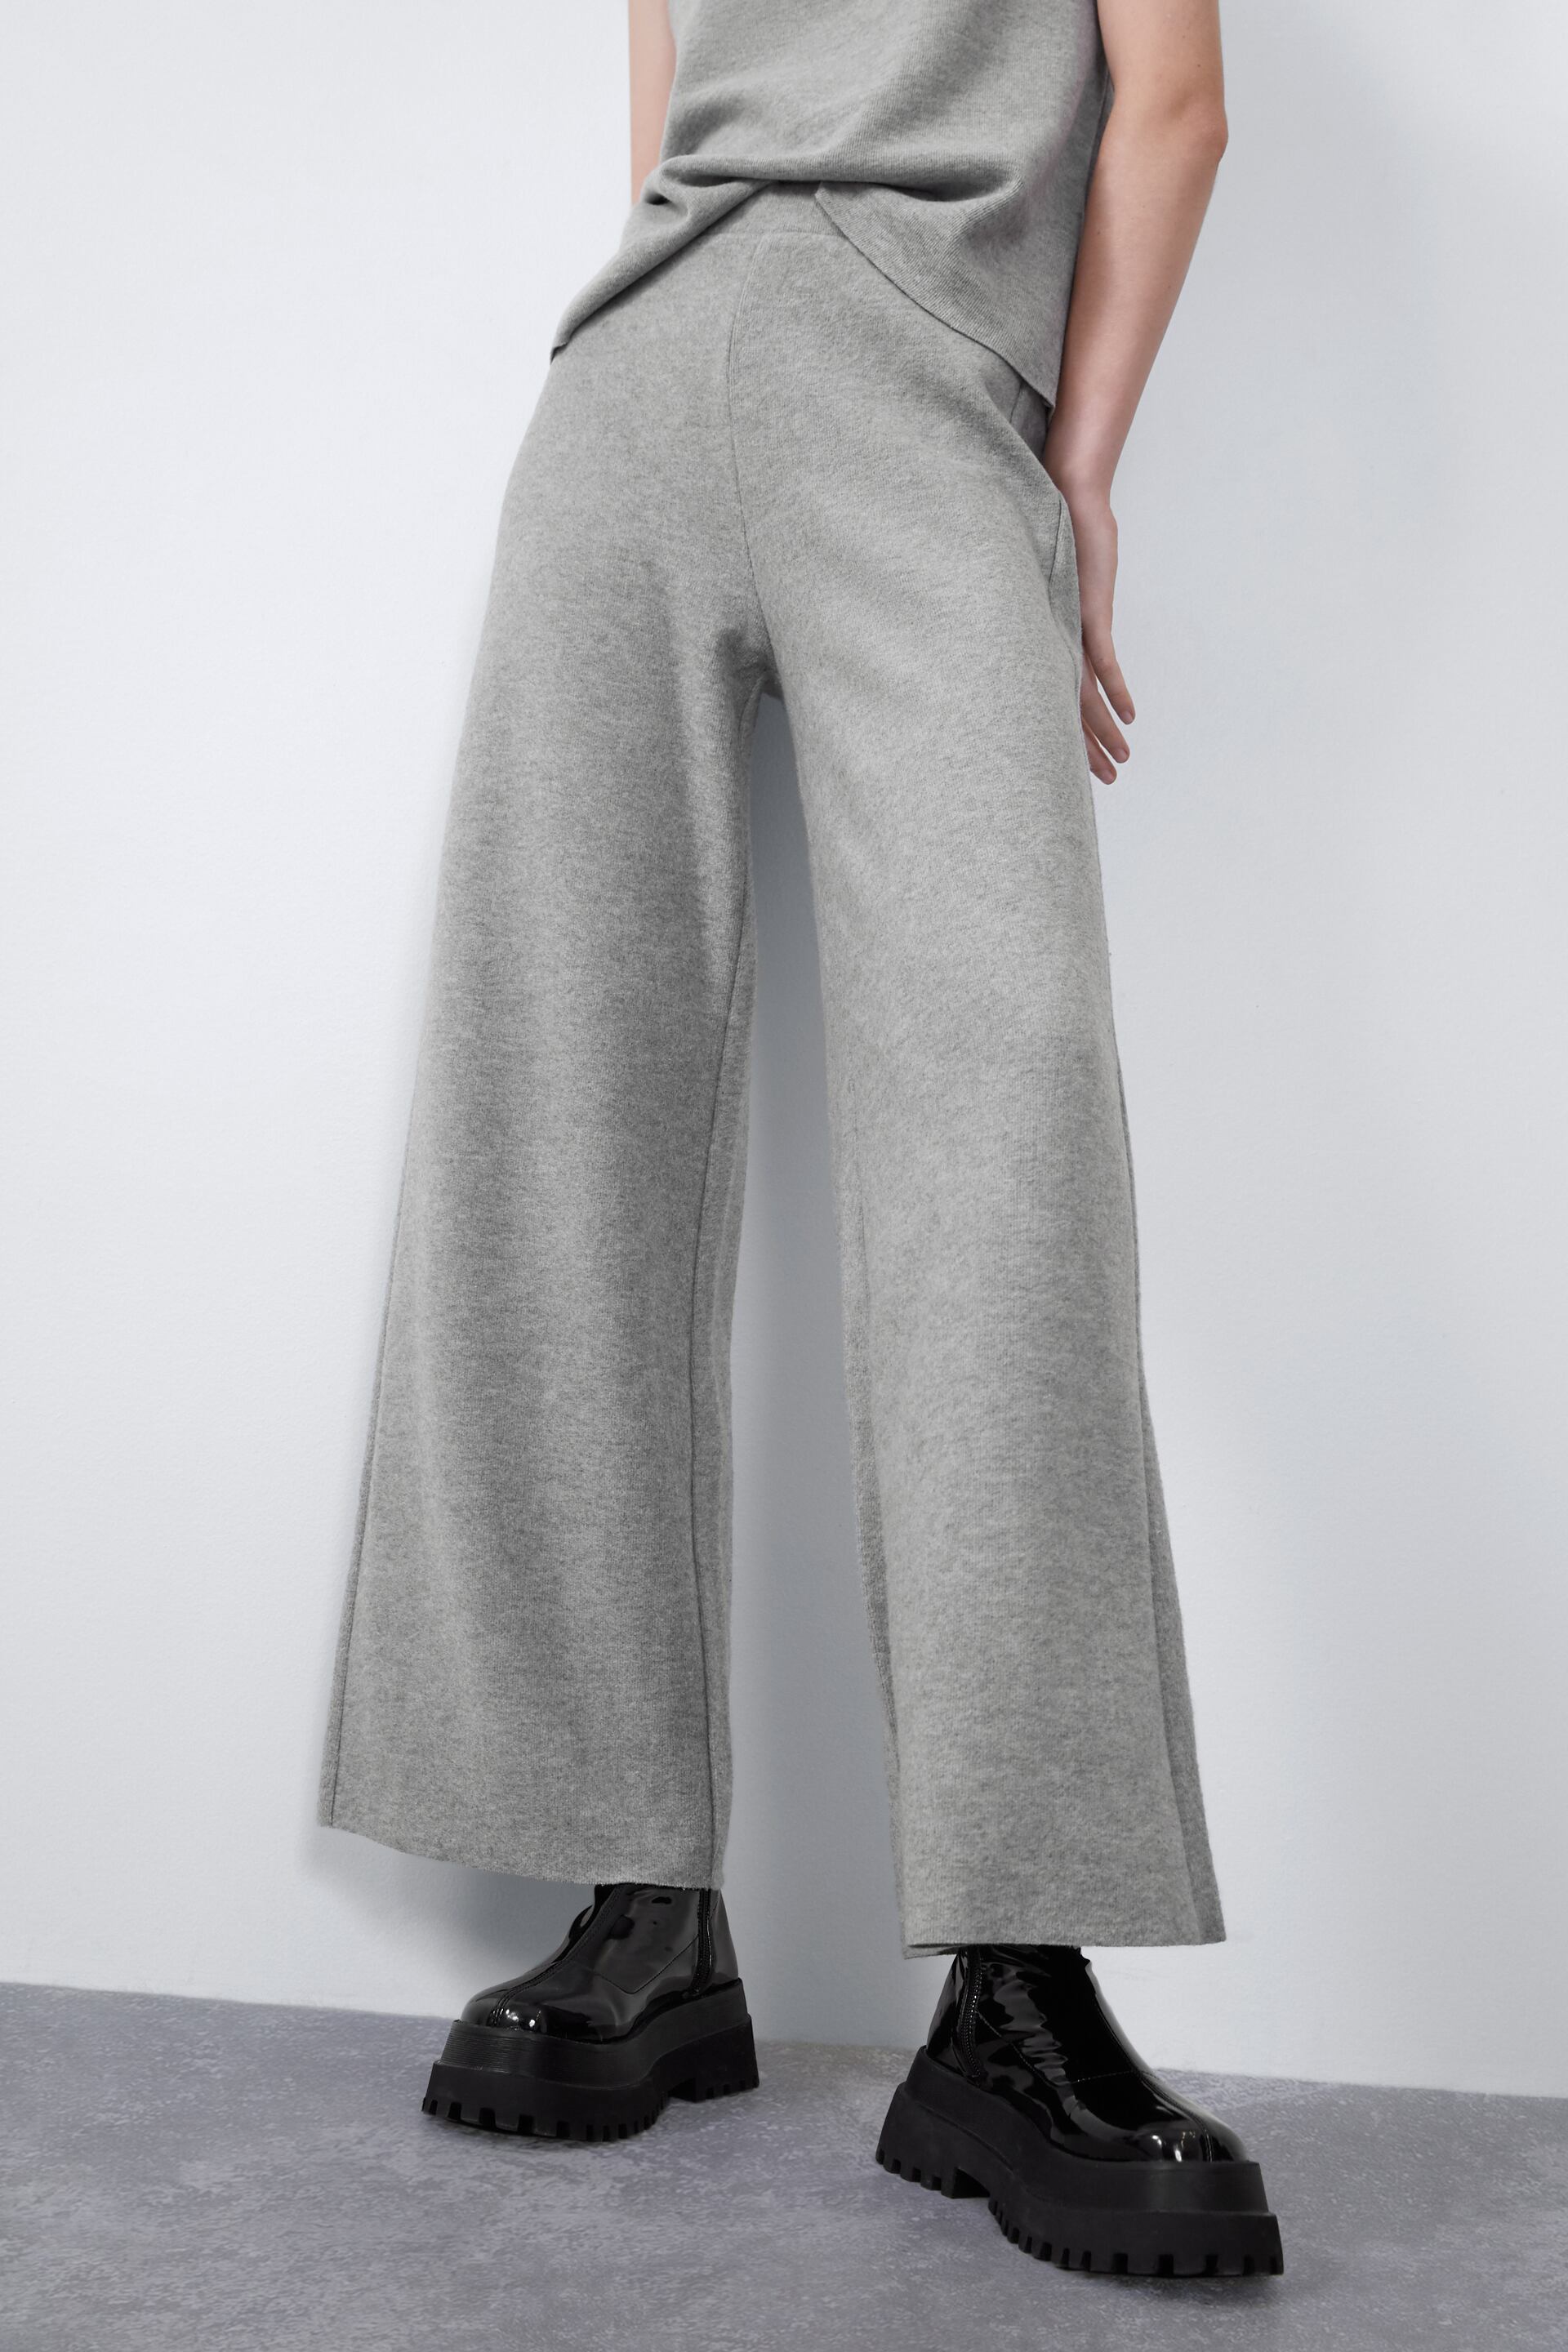 Zara soft-touch grey wide leg knitted trousers